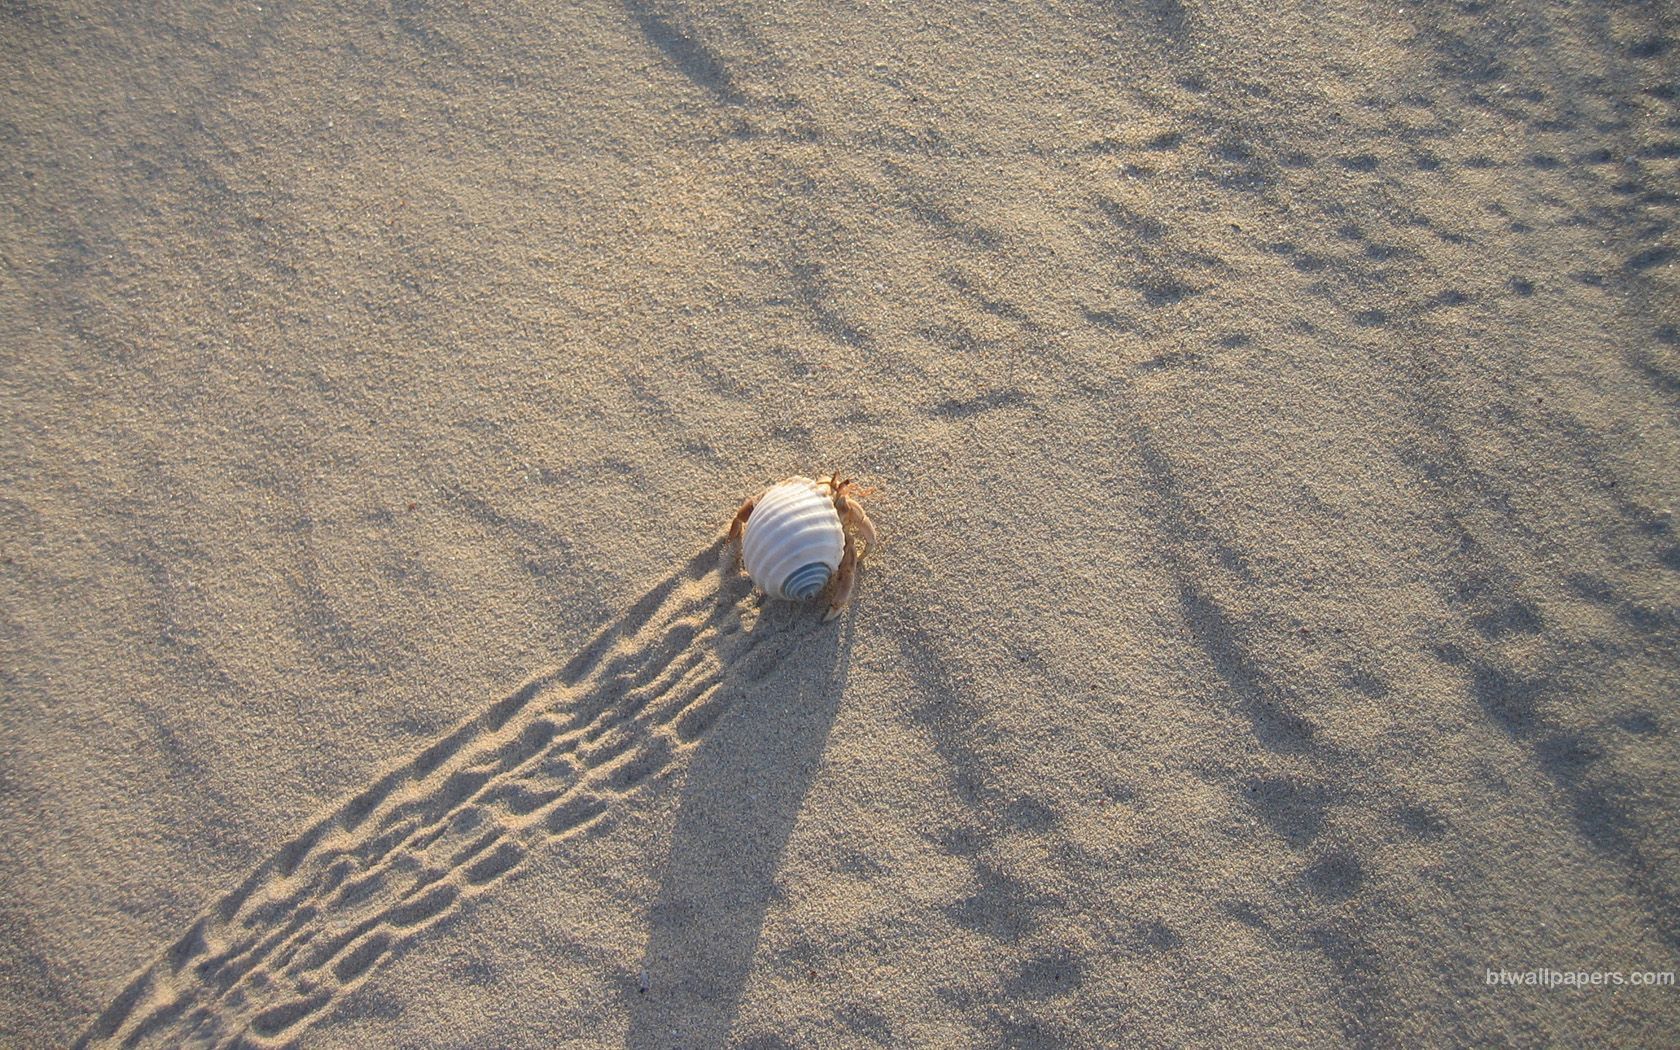 Image detail for -Broome Hermit Crab. Wallpaper Photo Image. Hermit crab, Hermit, Little pets